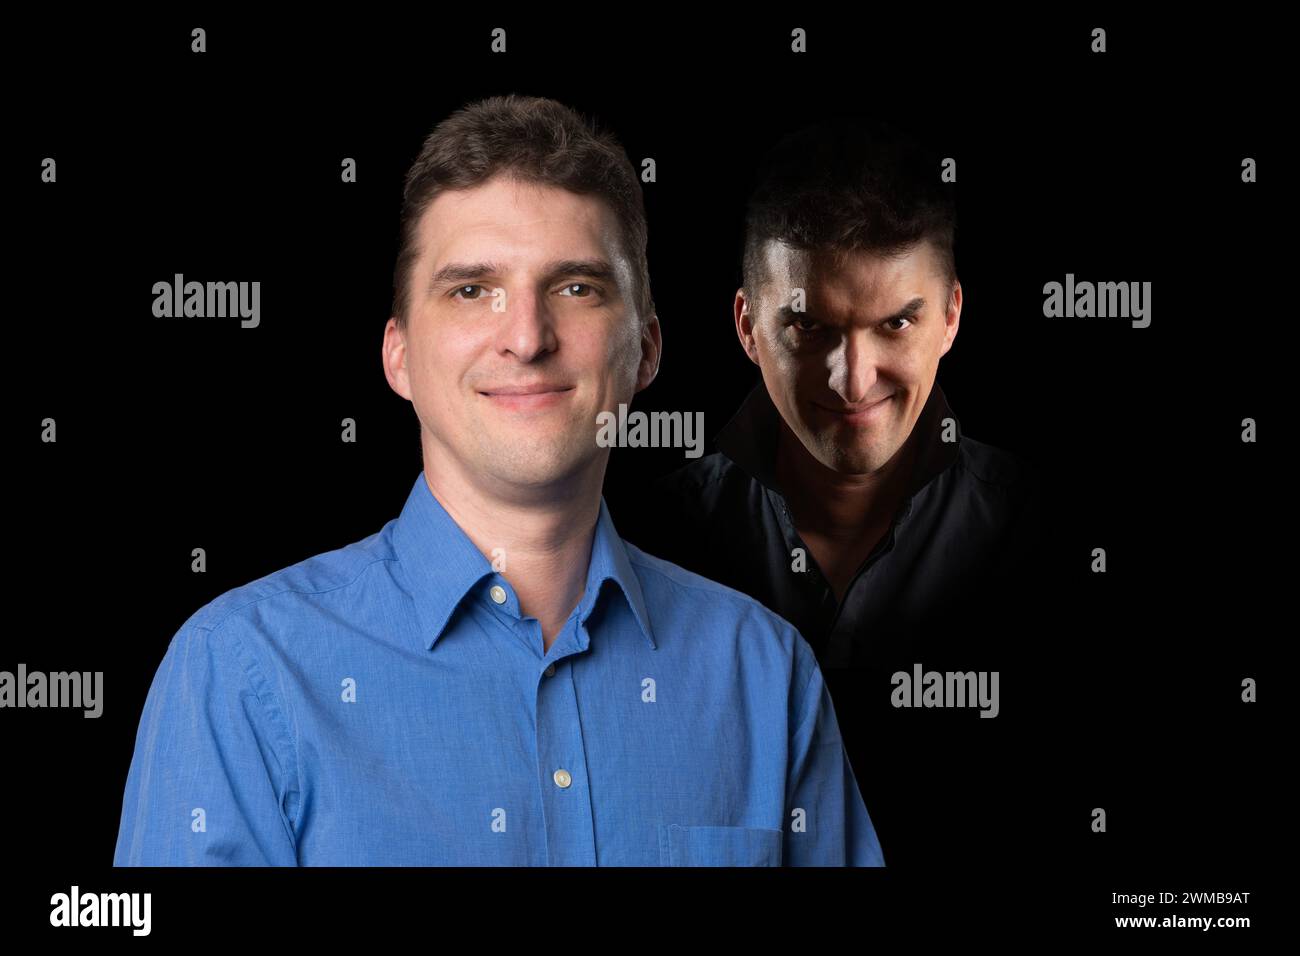 Nice looking young man with an evil character, a wicked looking face standing in the shadows behind him Stock Photo